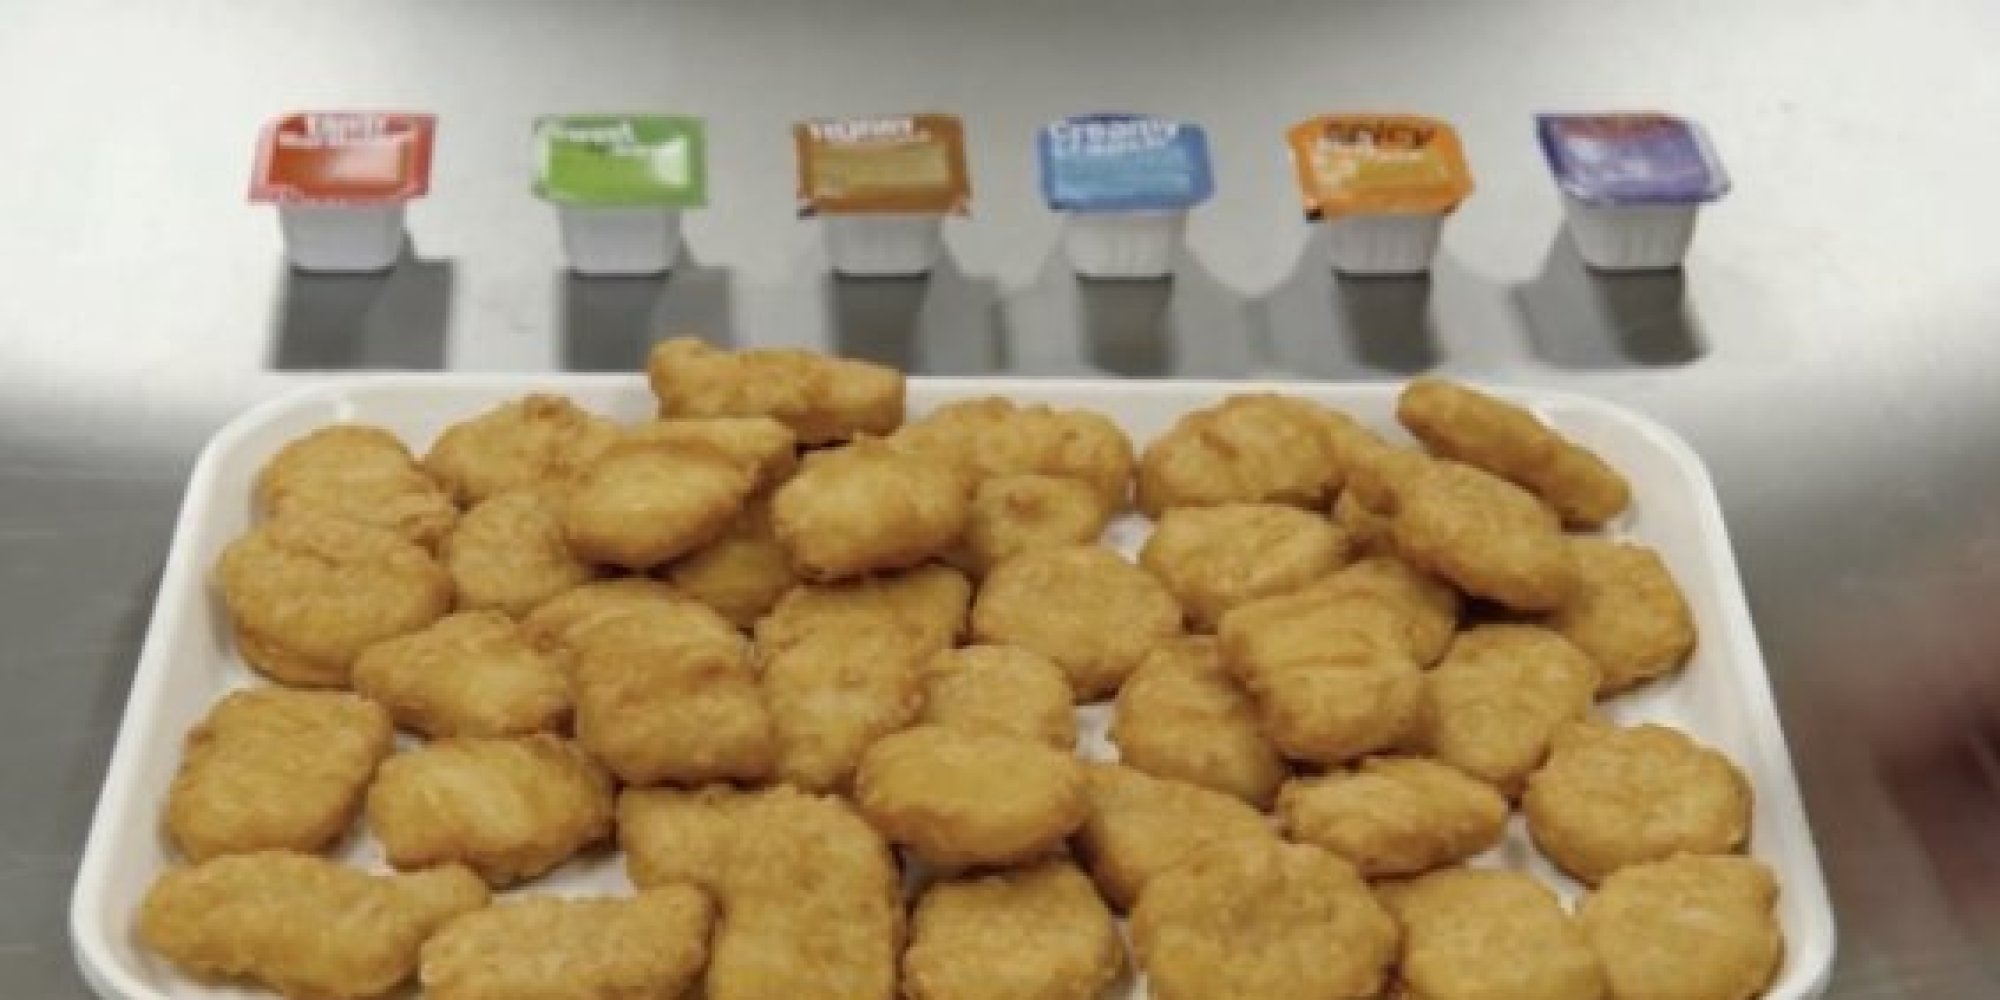 mcdonalds chicken nuggets made of